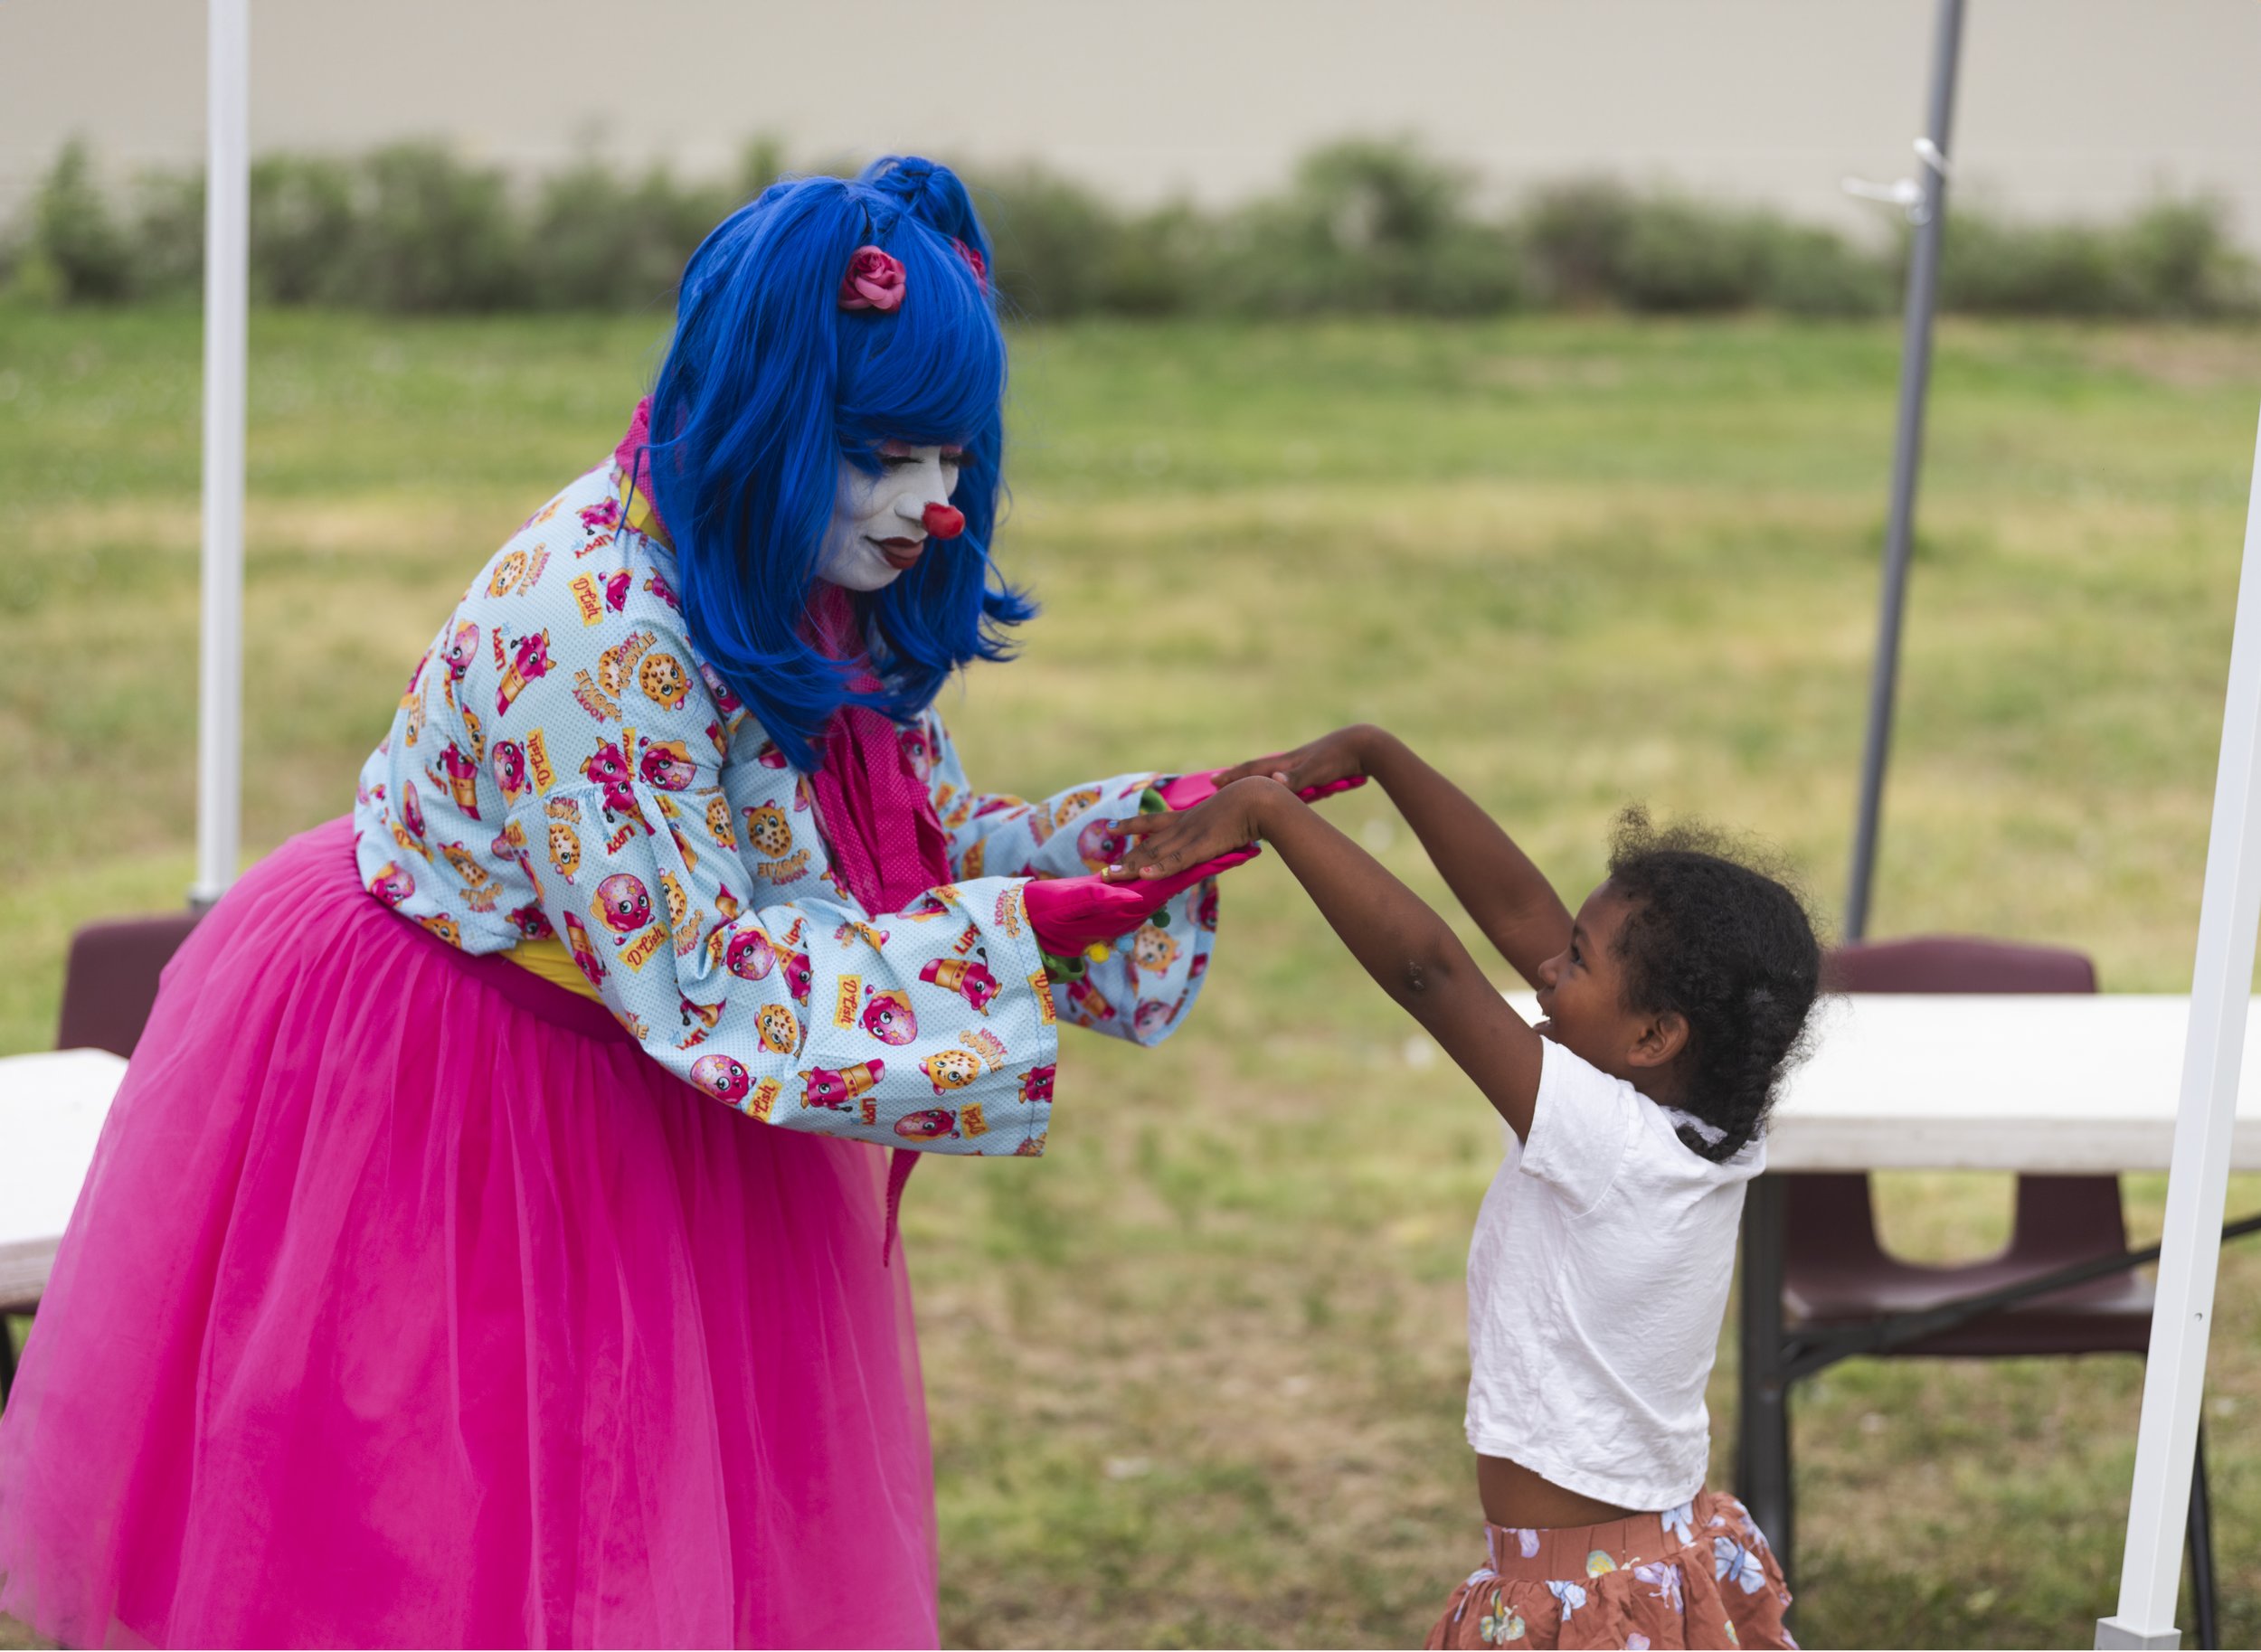  A little girl shows BlahAwesome her fingernails. Photo: Adrian Michael 